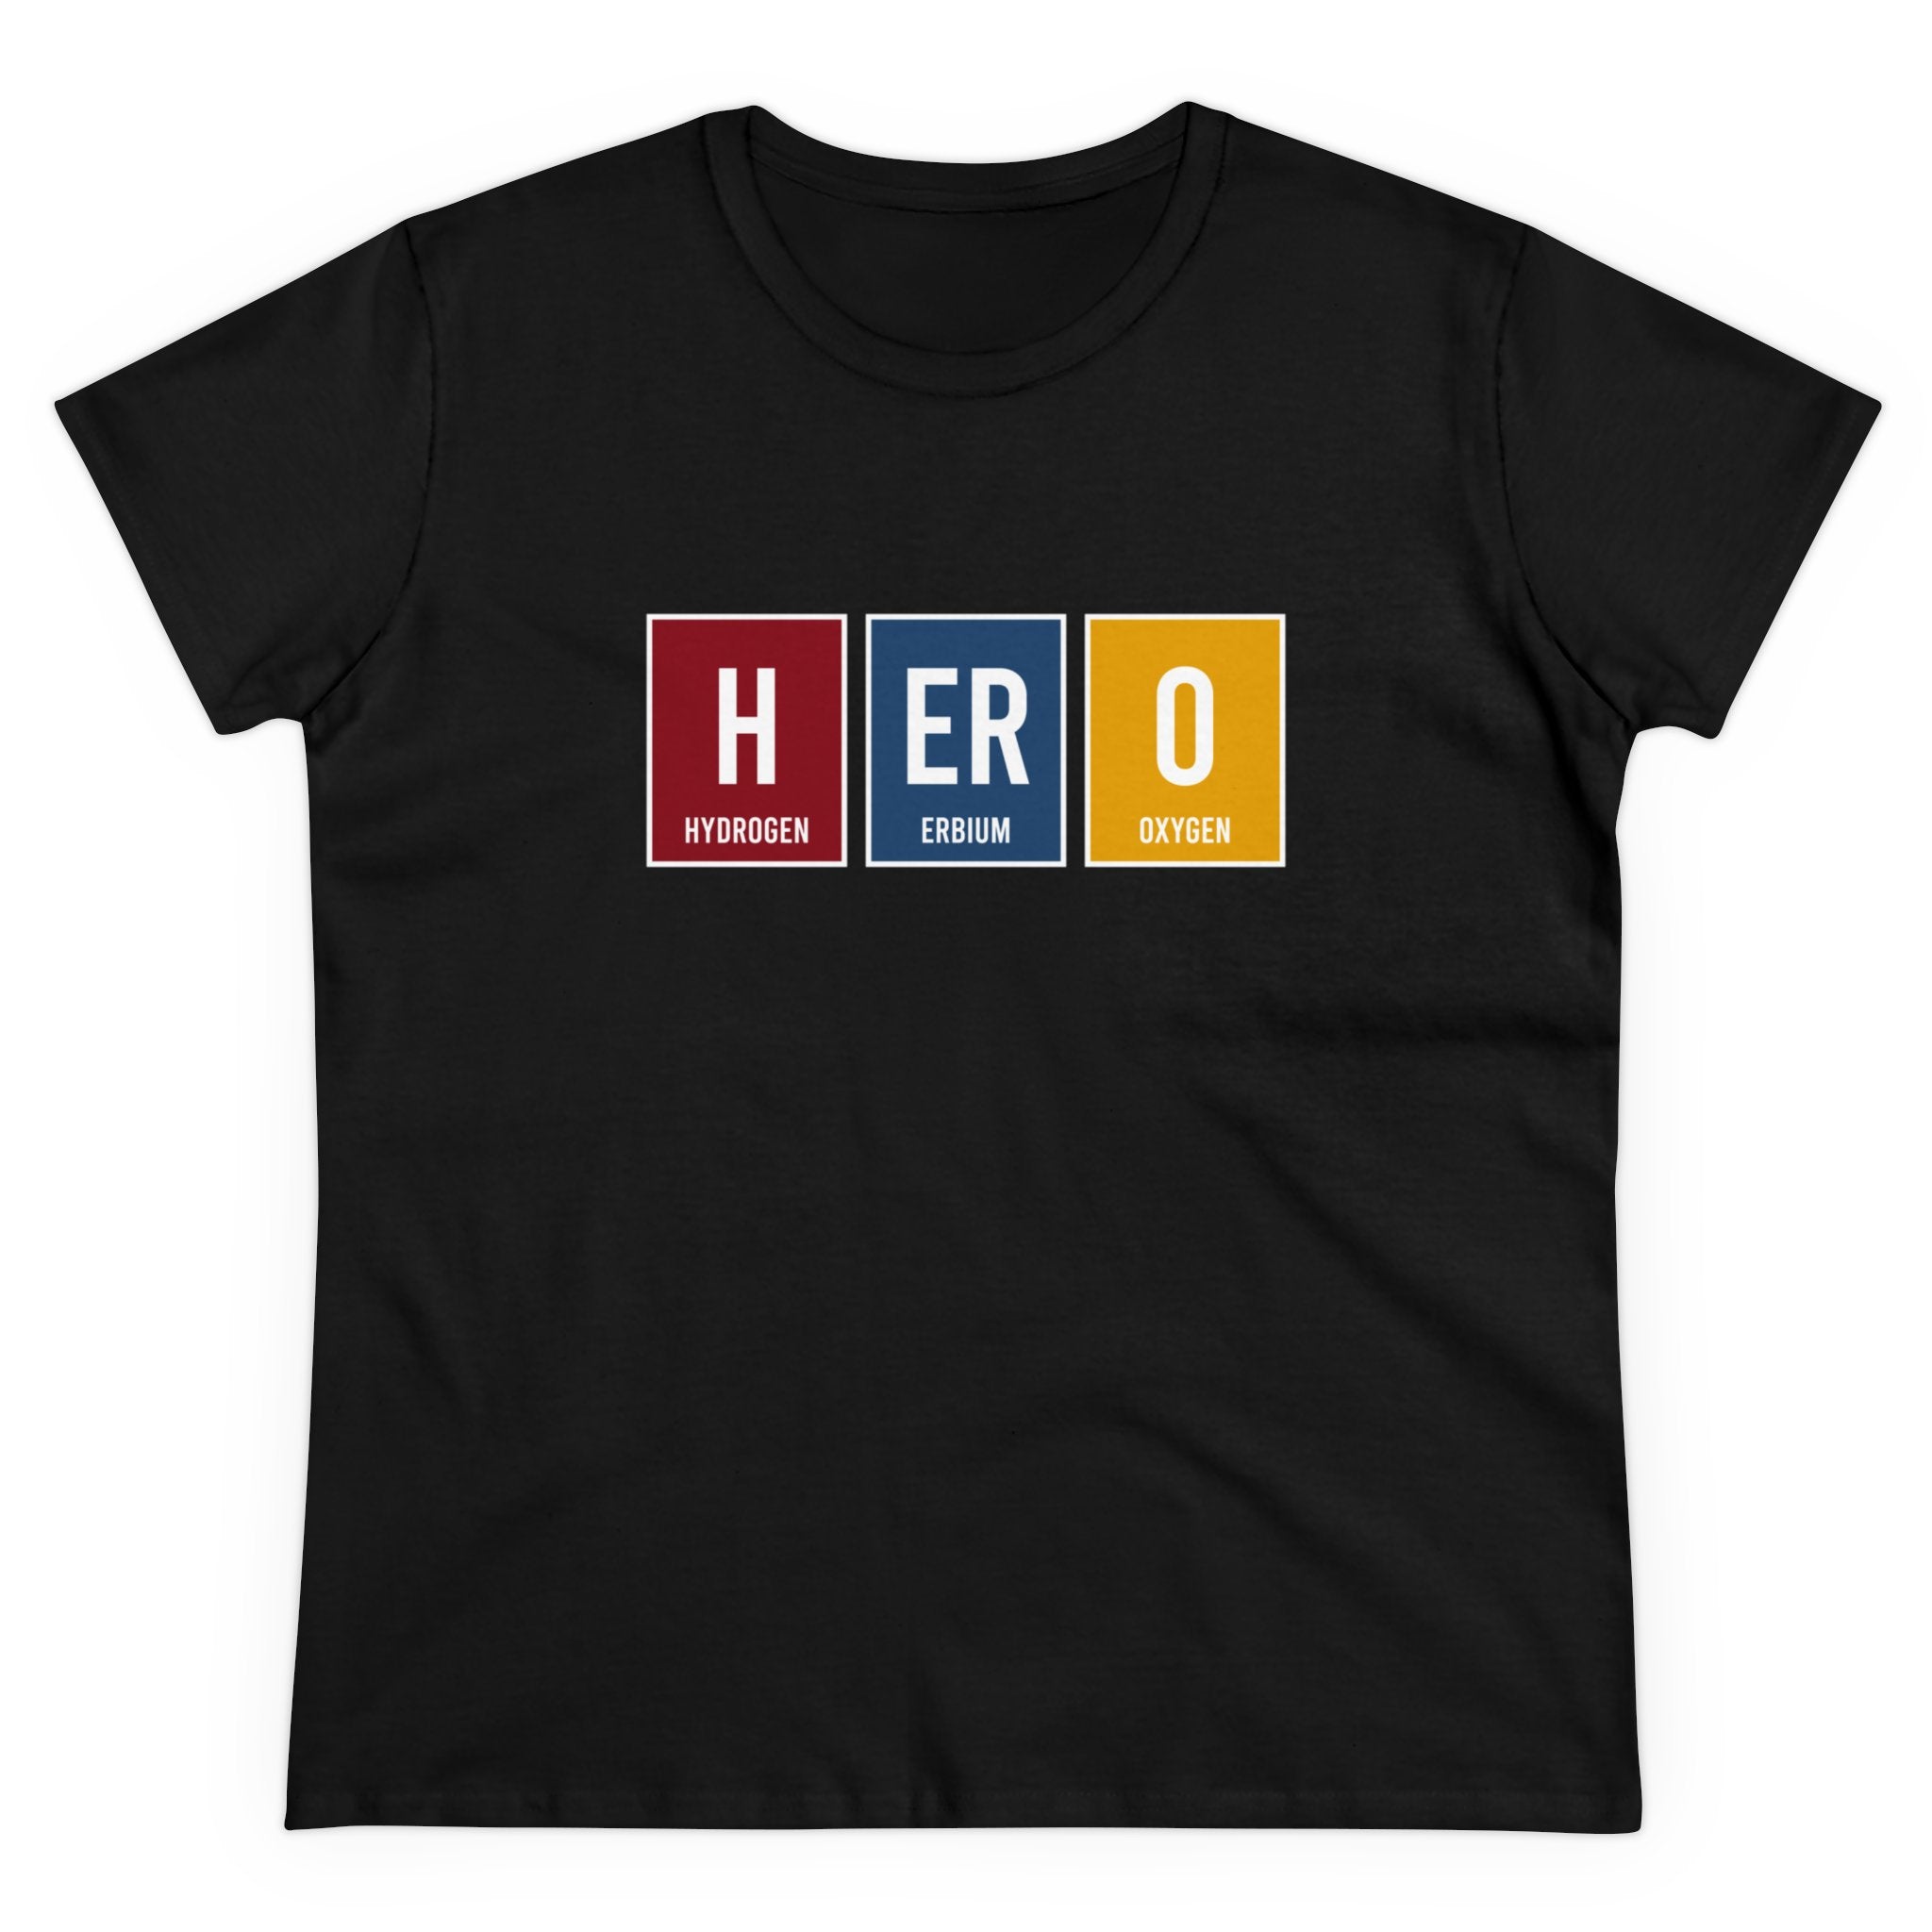 Black hooded sweatshirt with periodic table style blocks reading "H", "Er", and "O," labeled as hydrogen, erbium, and oxygen respectively, spelling "HERO". Crafted from supreme comfort cotton for an everyday fit.